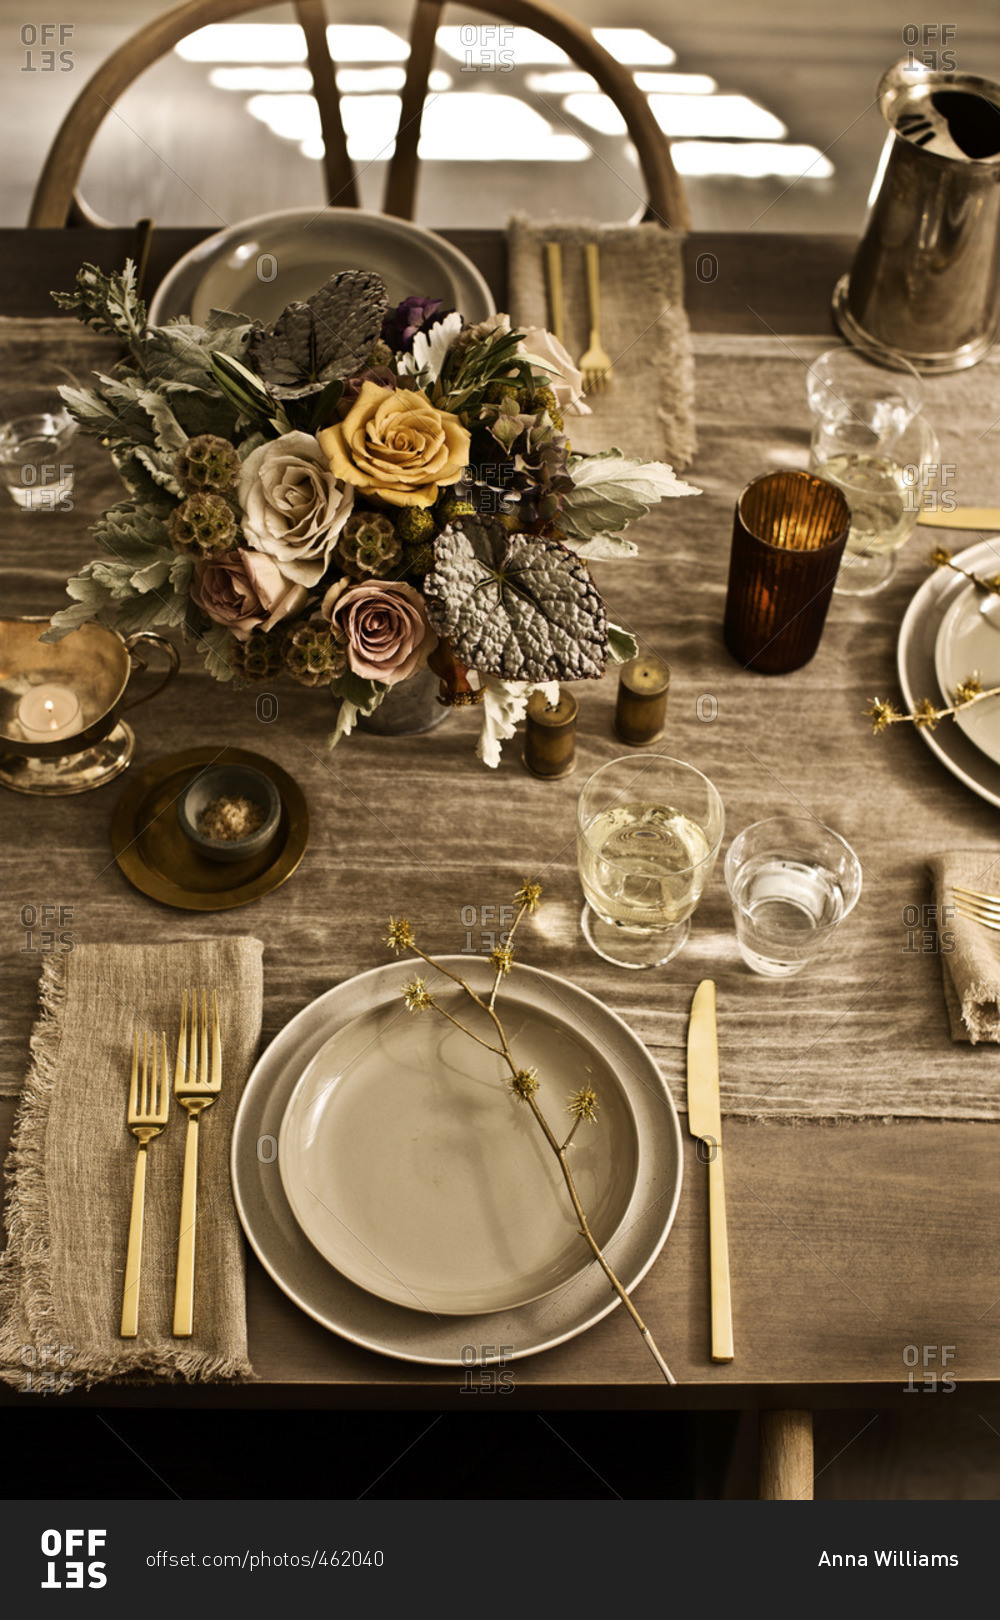 Place settings with floral arrangement and table runner